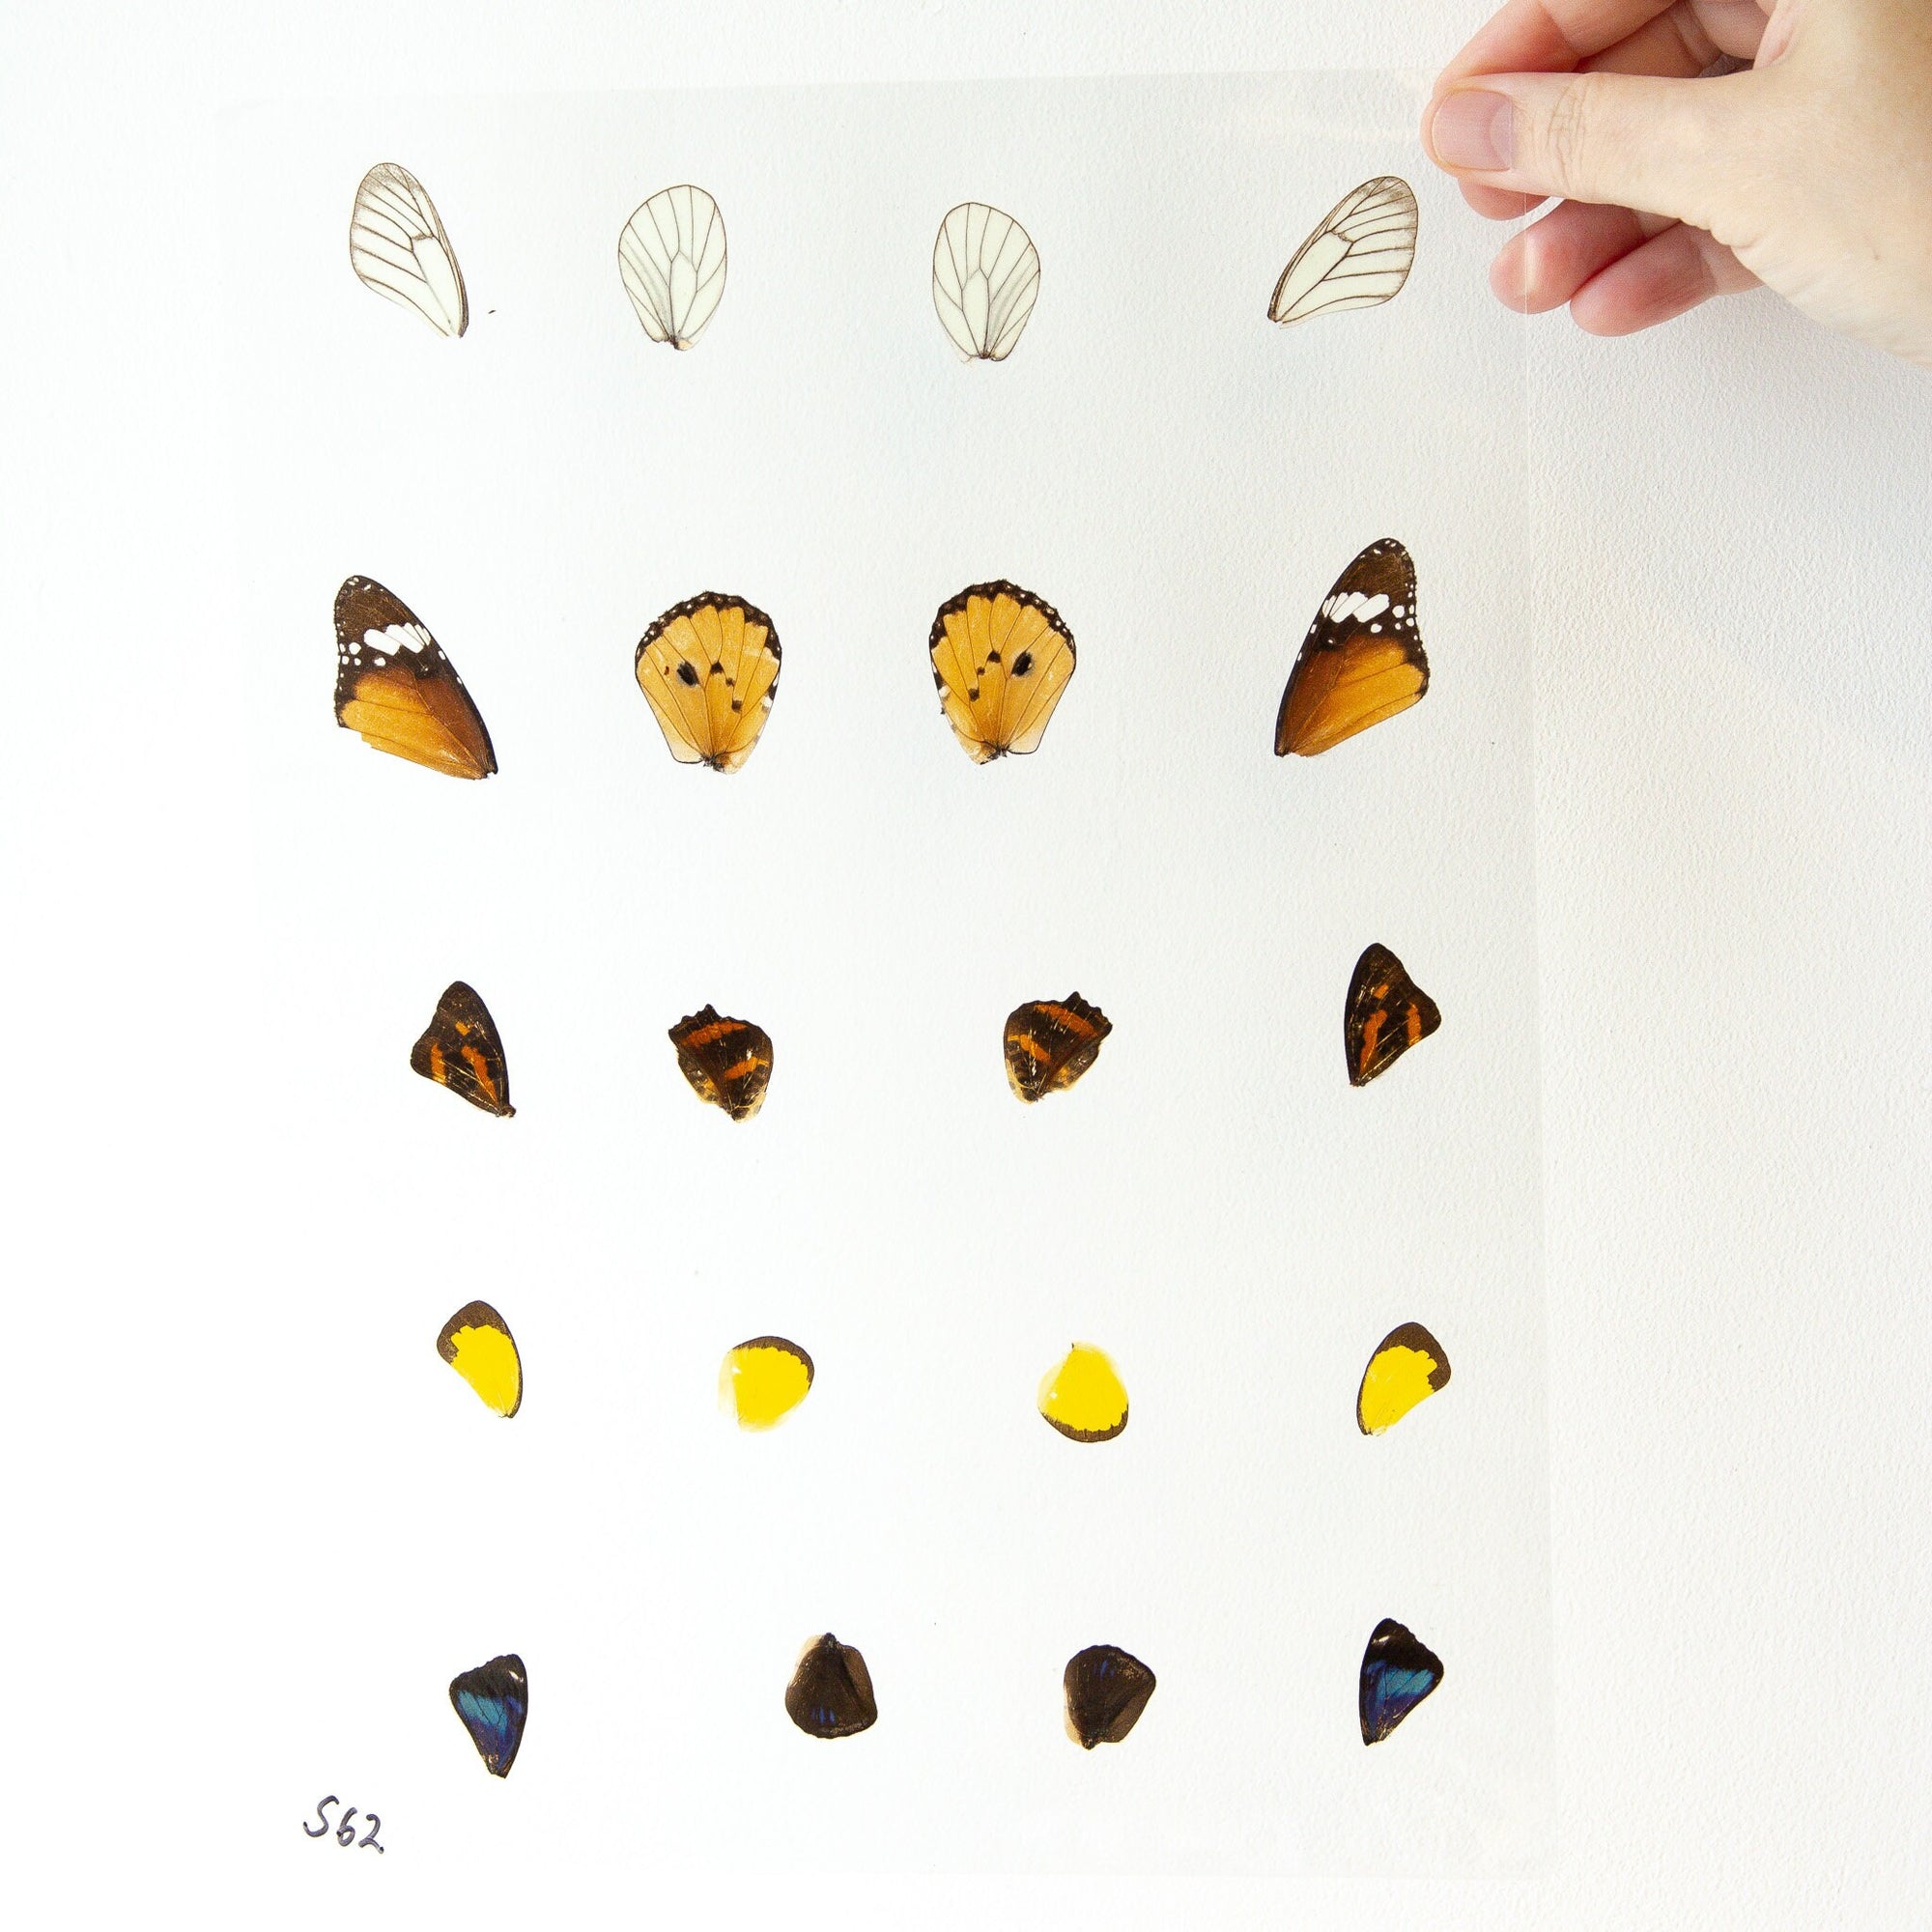 Butterfly Wings GLOSSY LAMINATED SHEET Real Ethically Sourced Specimens Moths Butterflies Wings for Art -- S62